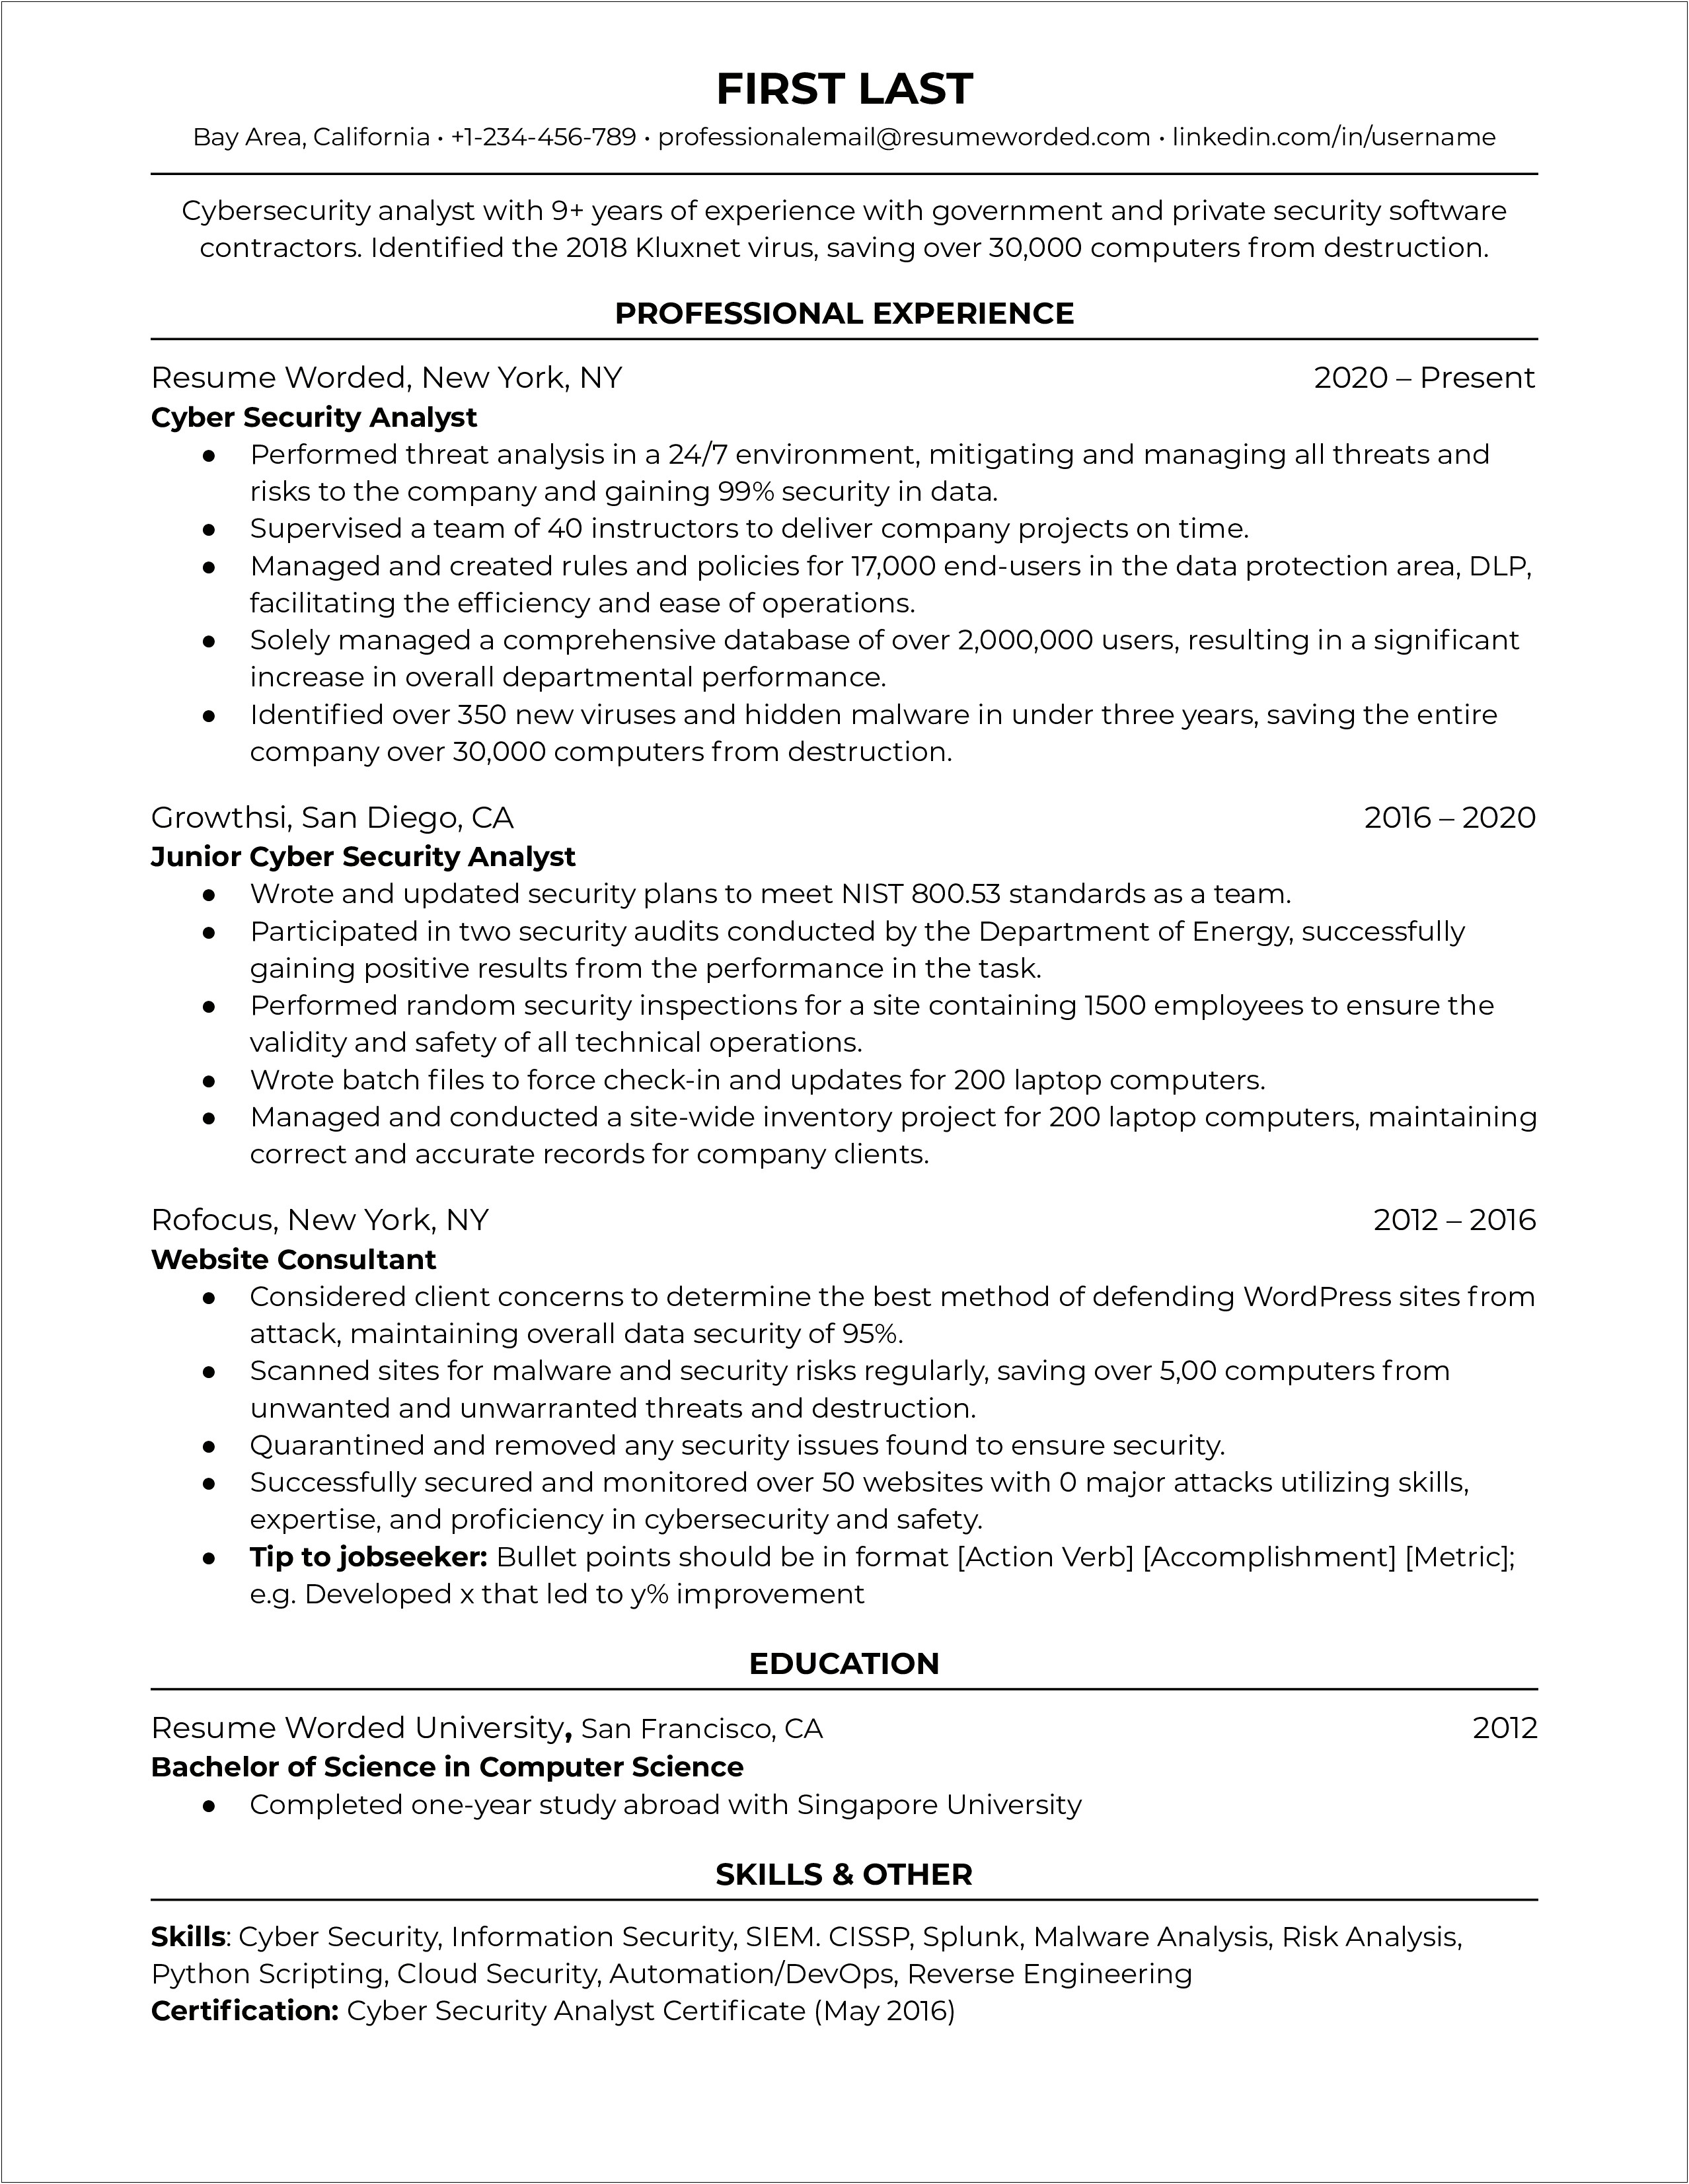 Ie Risk Specialist Good On A Resume